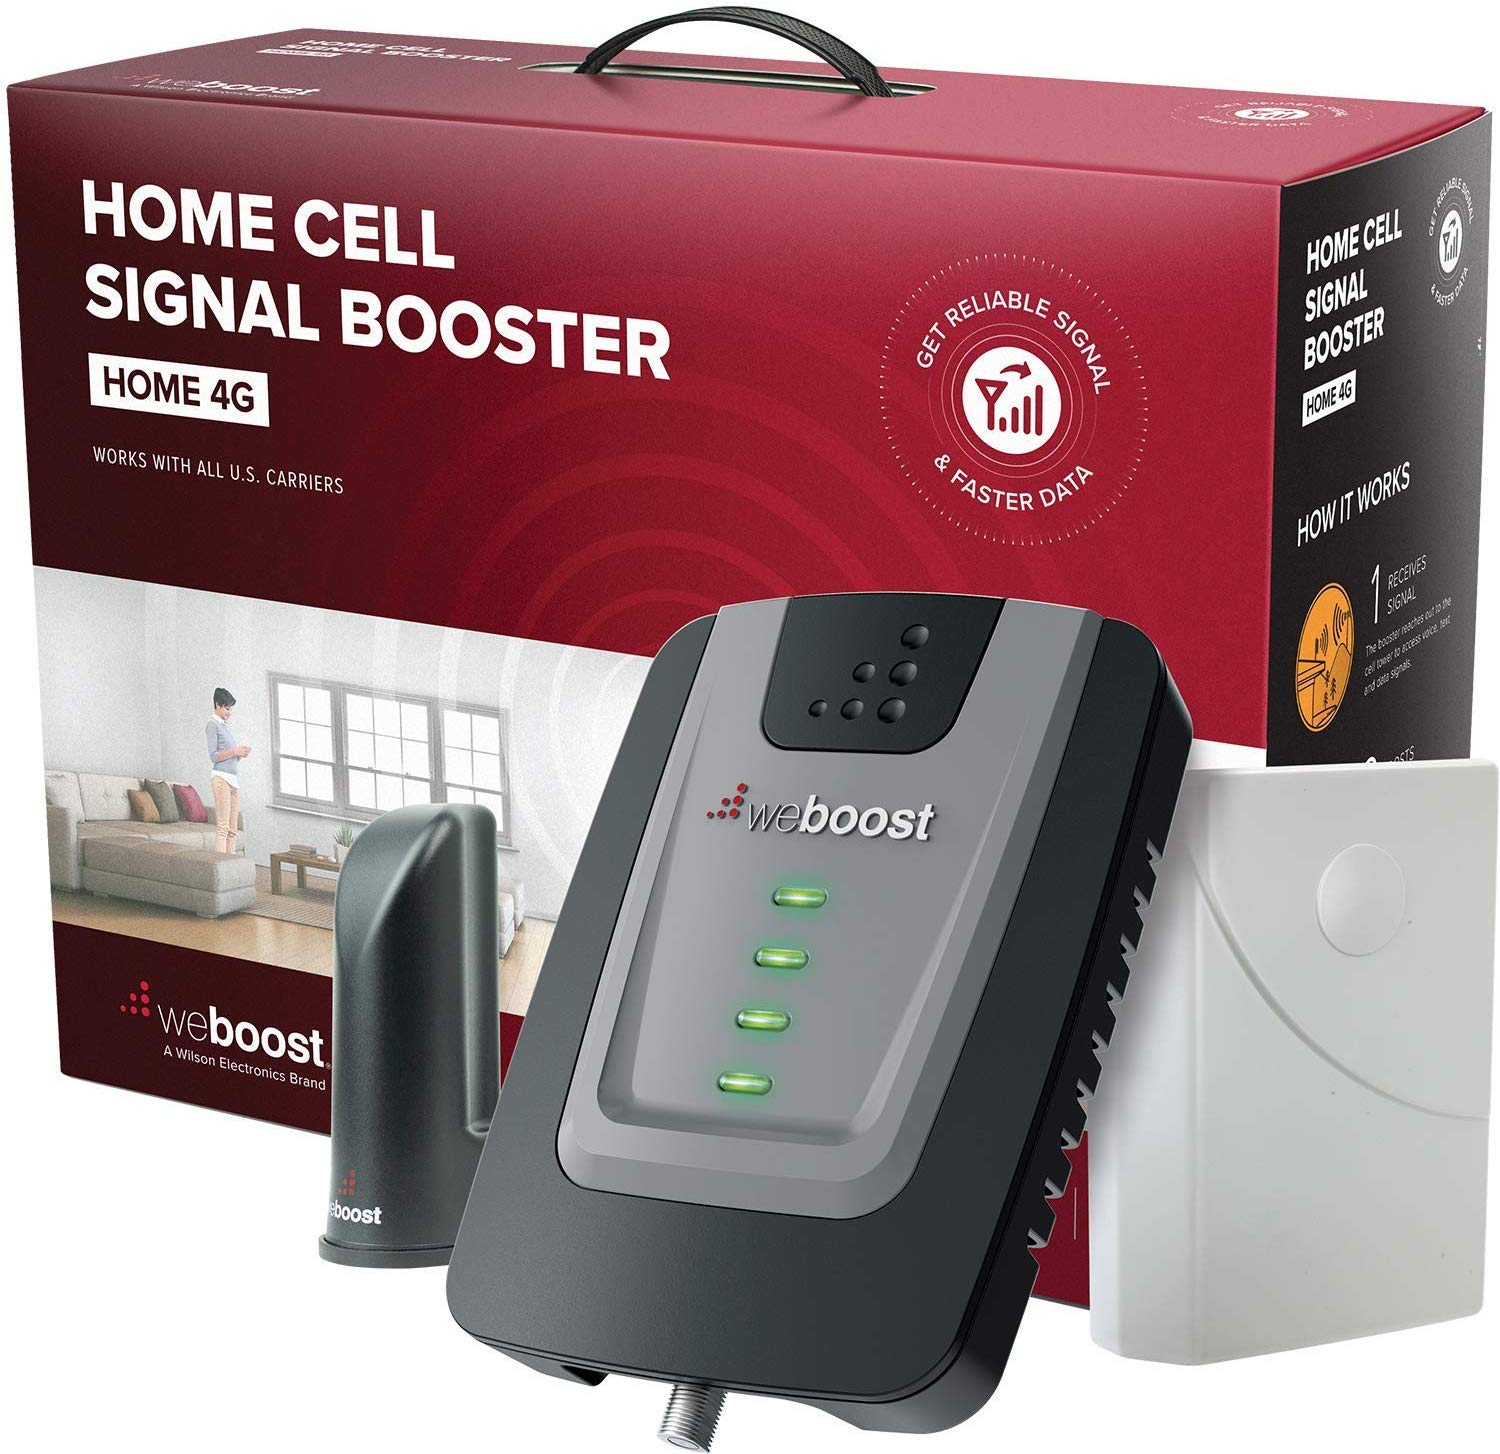 weBoost Home 4G (470101) Cell Phone Signal Booster Kit Up to 1,500 sq ft All U.S. Carriers - Verizon, AT&T, T-Mobile, Sprint & More | FCC Approved